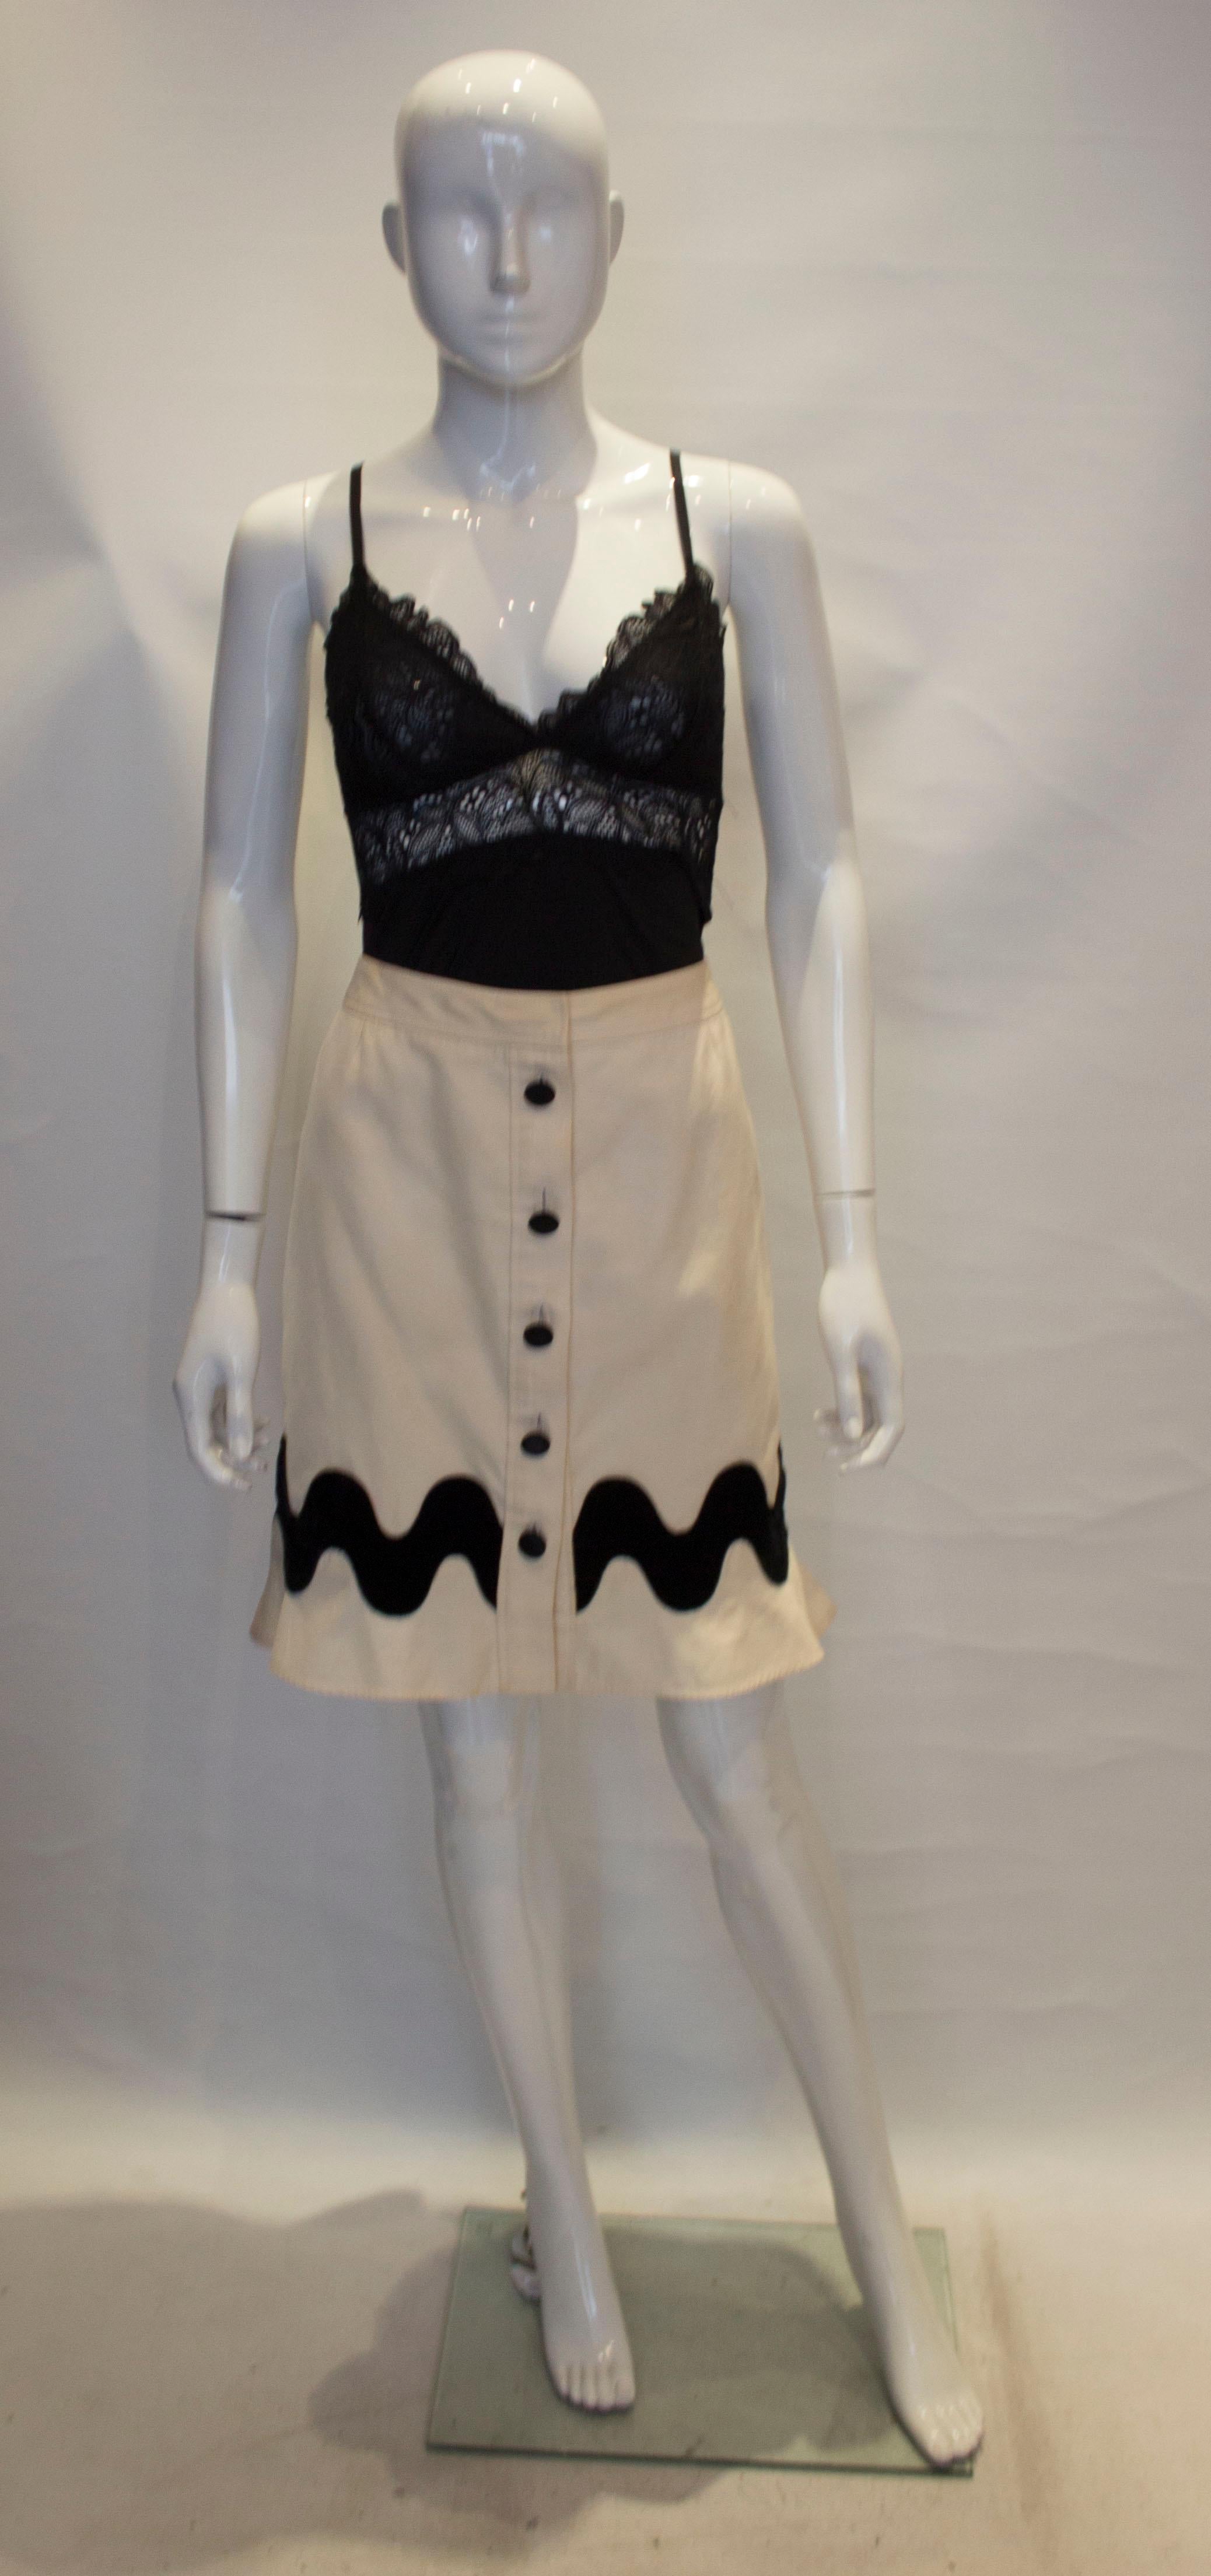 A fun skirt for Fall by Yves Saint Laurent. The skirt is in a white linen mix with a button through front and frill at the hem. It has a five button opening with velvet covered buttons, and velvet  band  near the hem. It is fully lined.